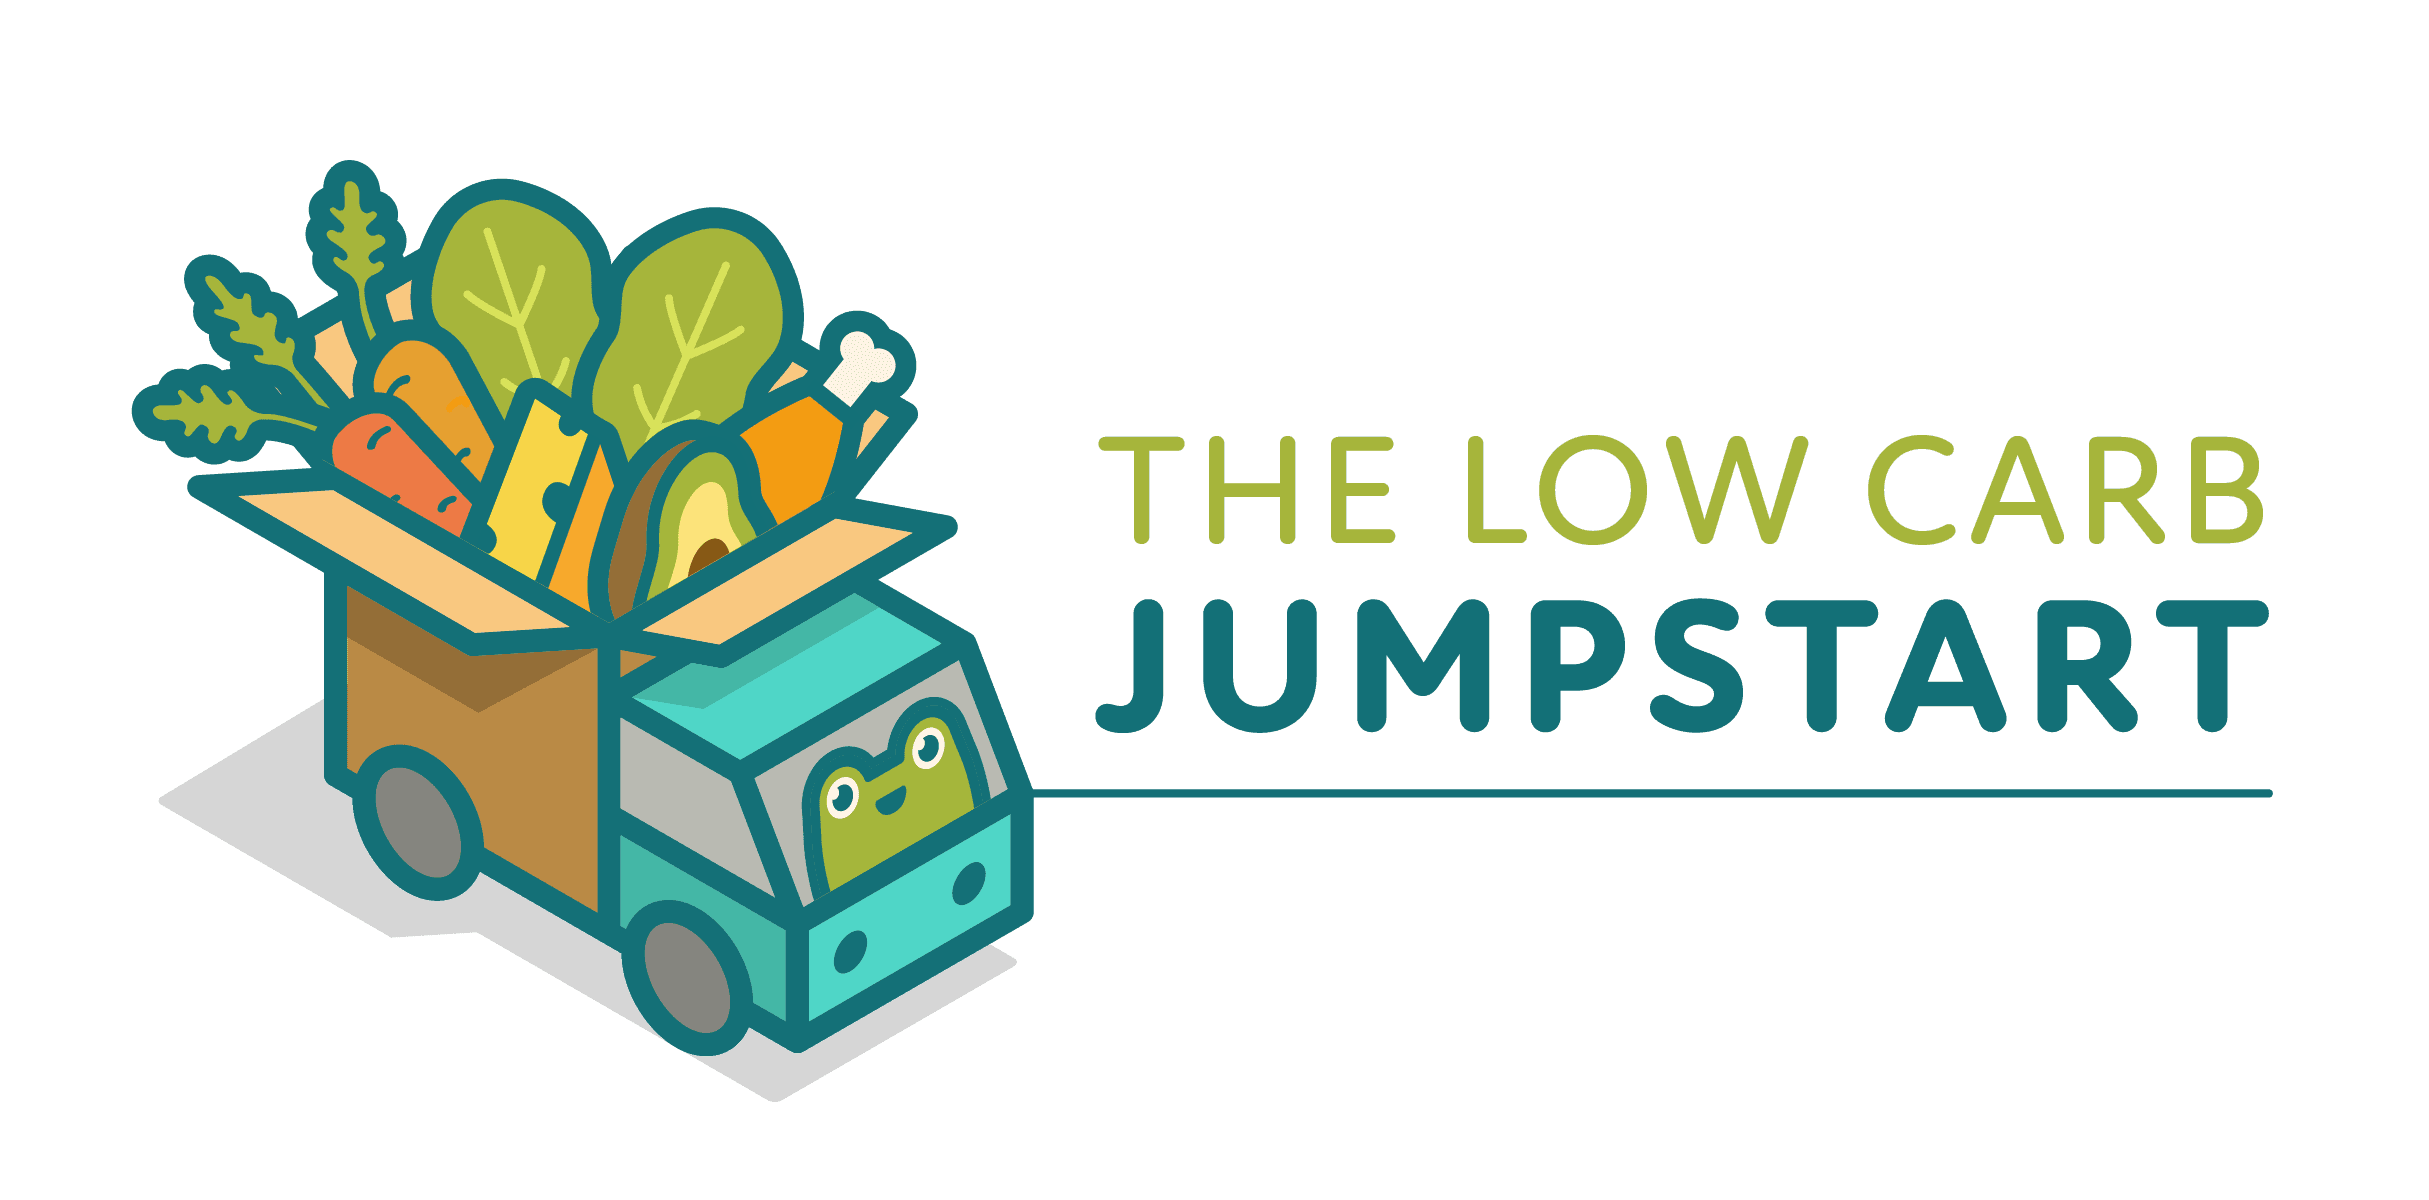 The Low Carb Jumpstart